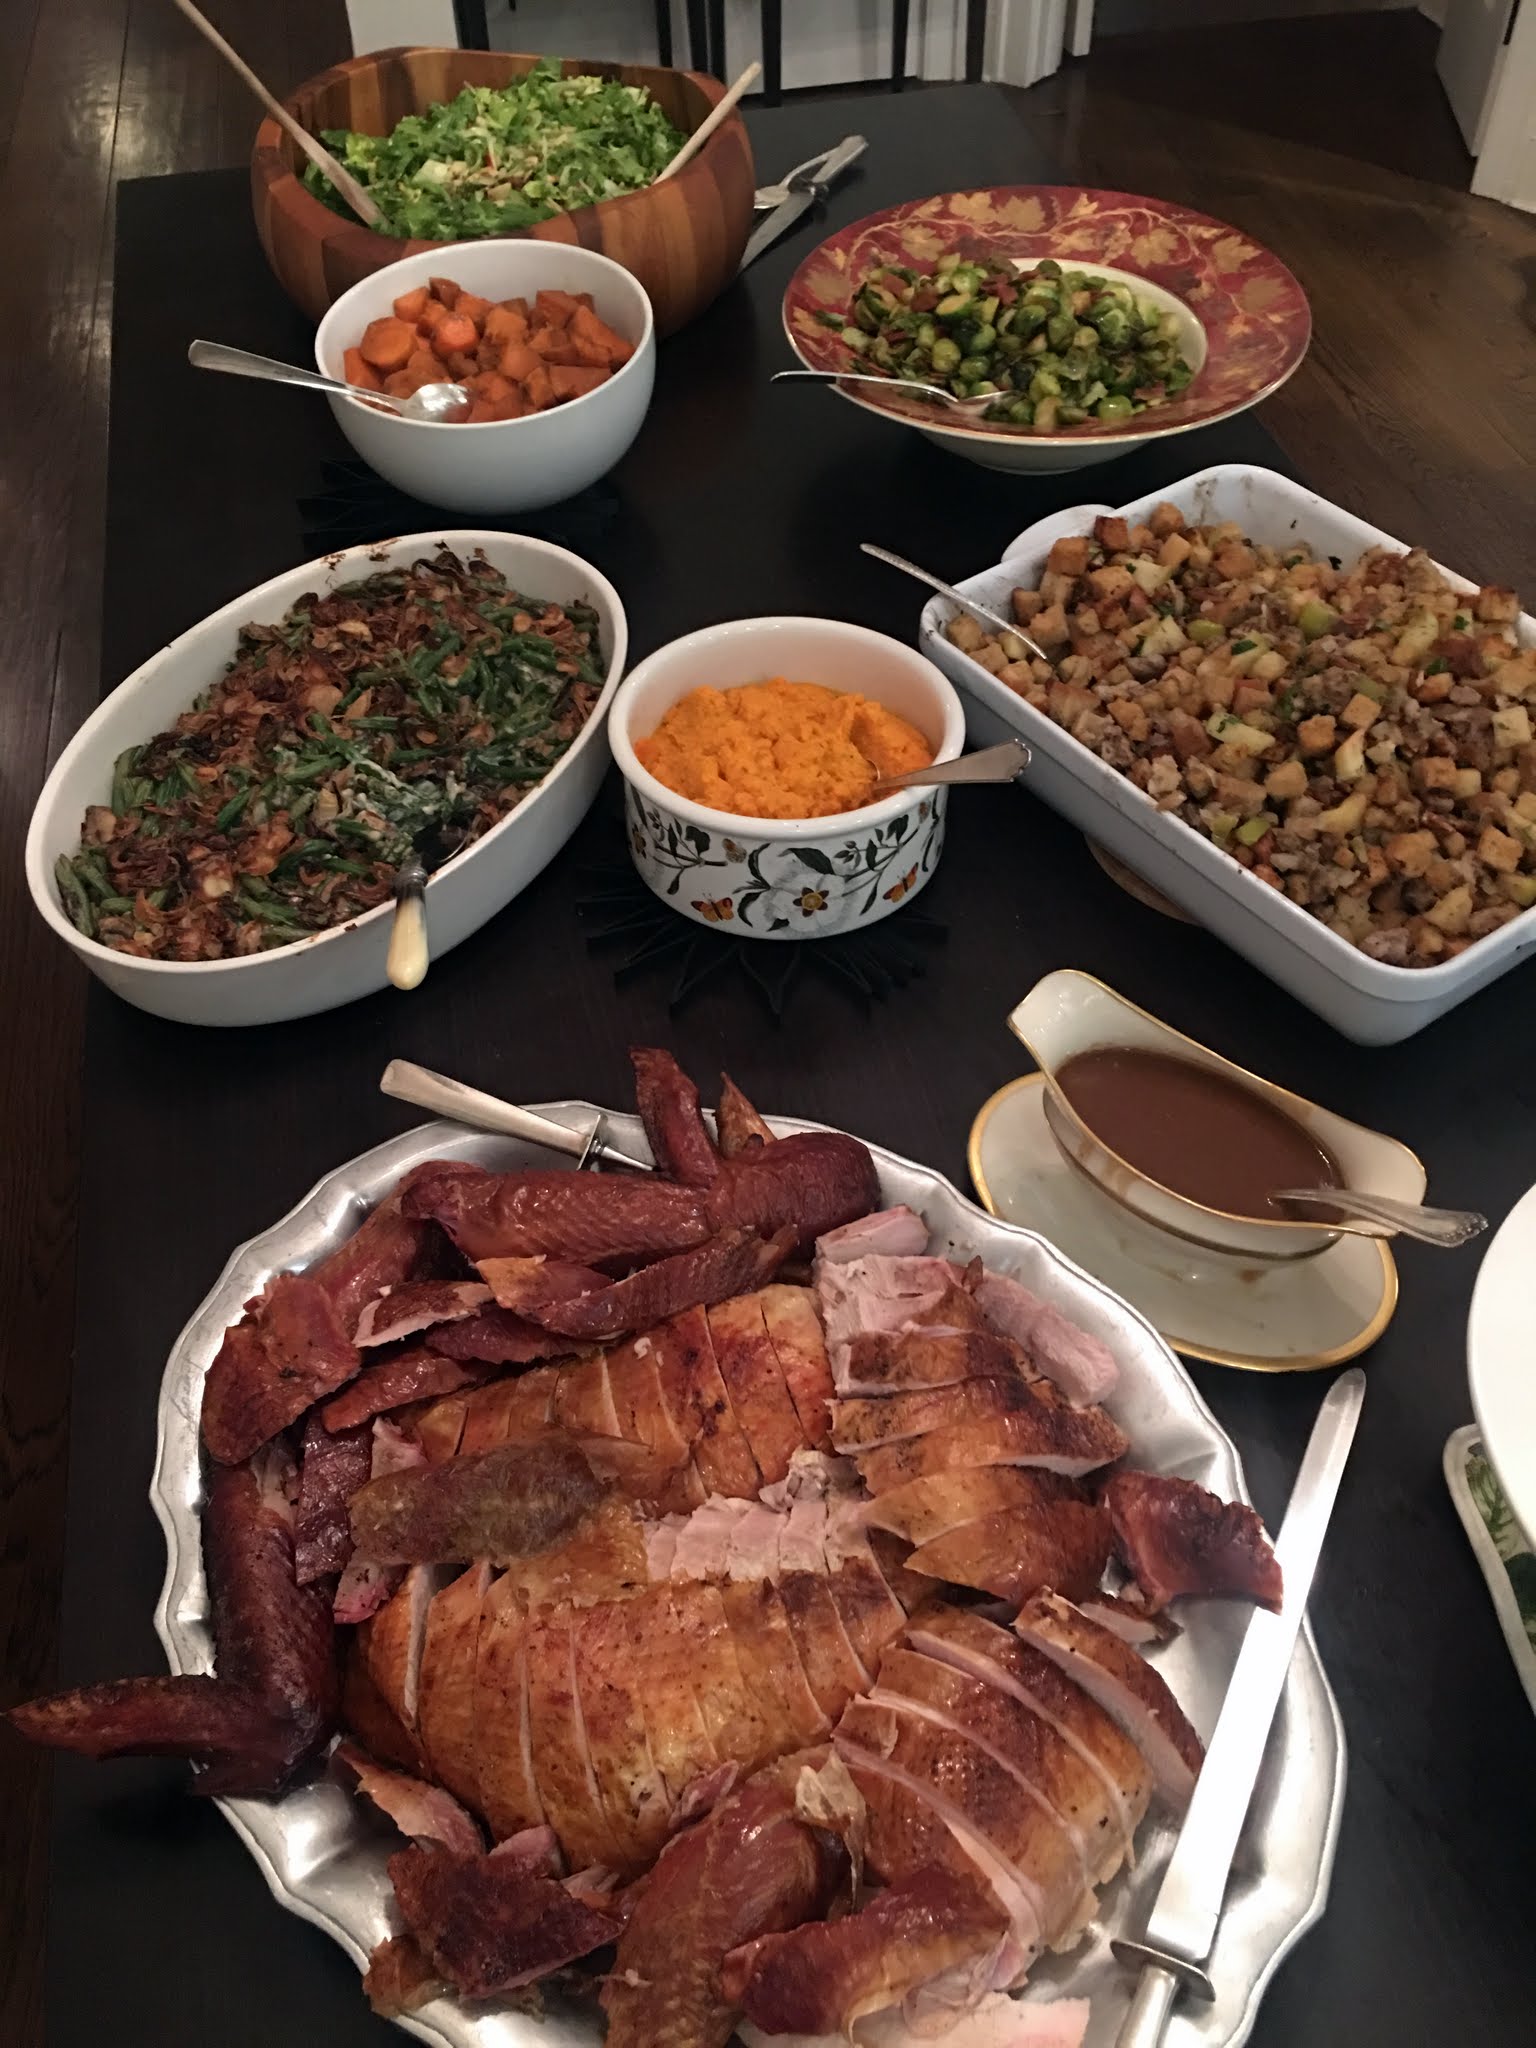 The Martha Stewart Blog : Blog Archive : Thanksgiving Photos from Our ...